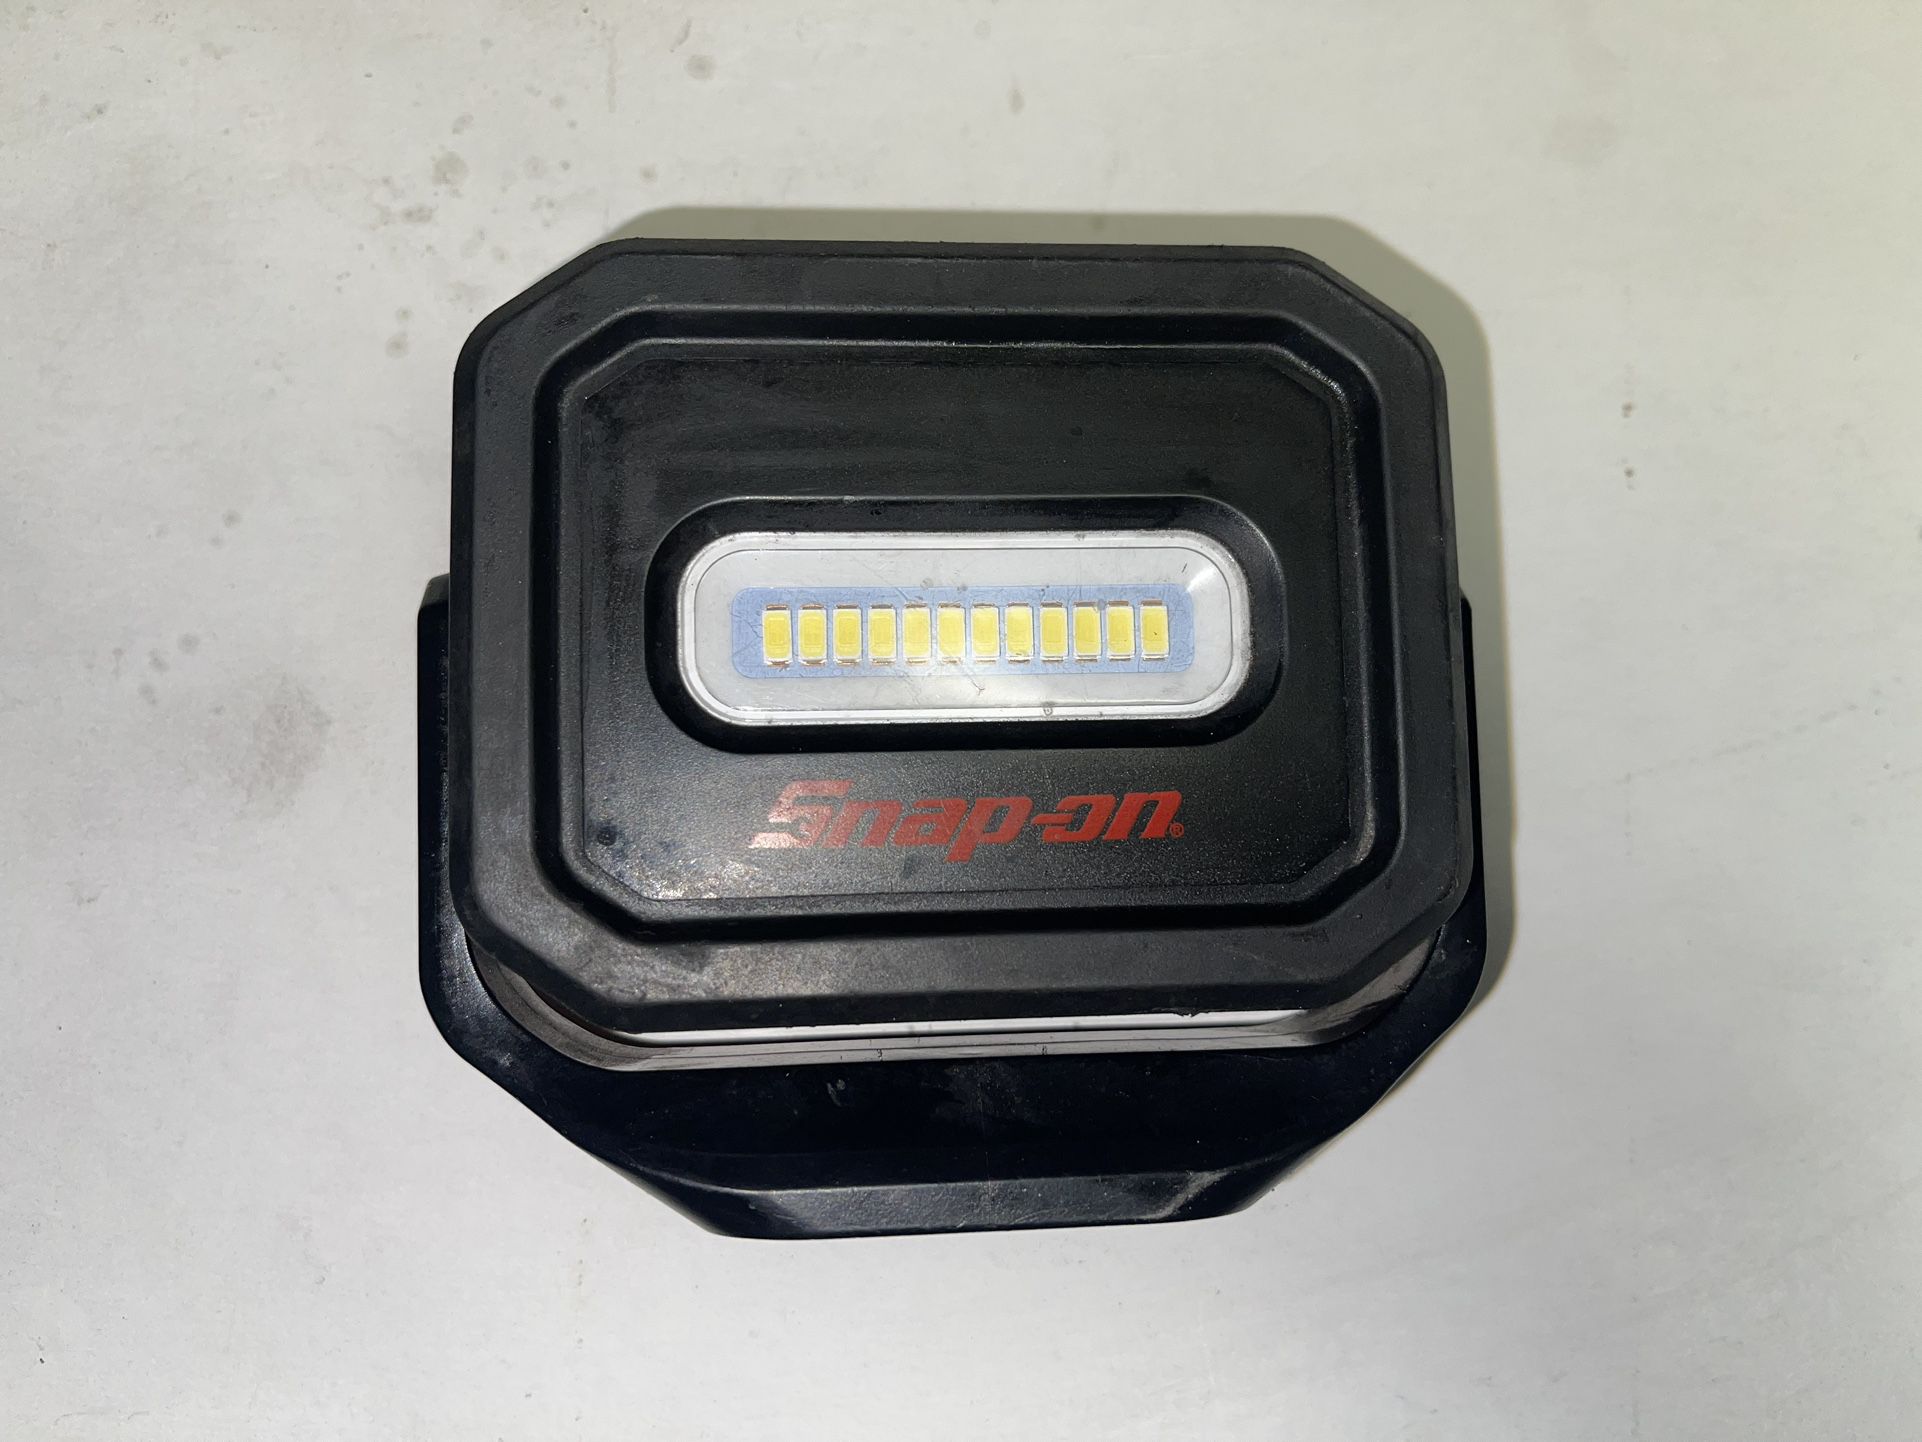 Snap-On magnetic light